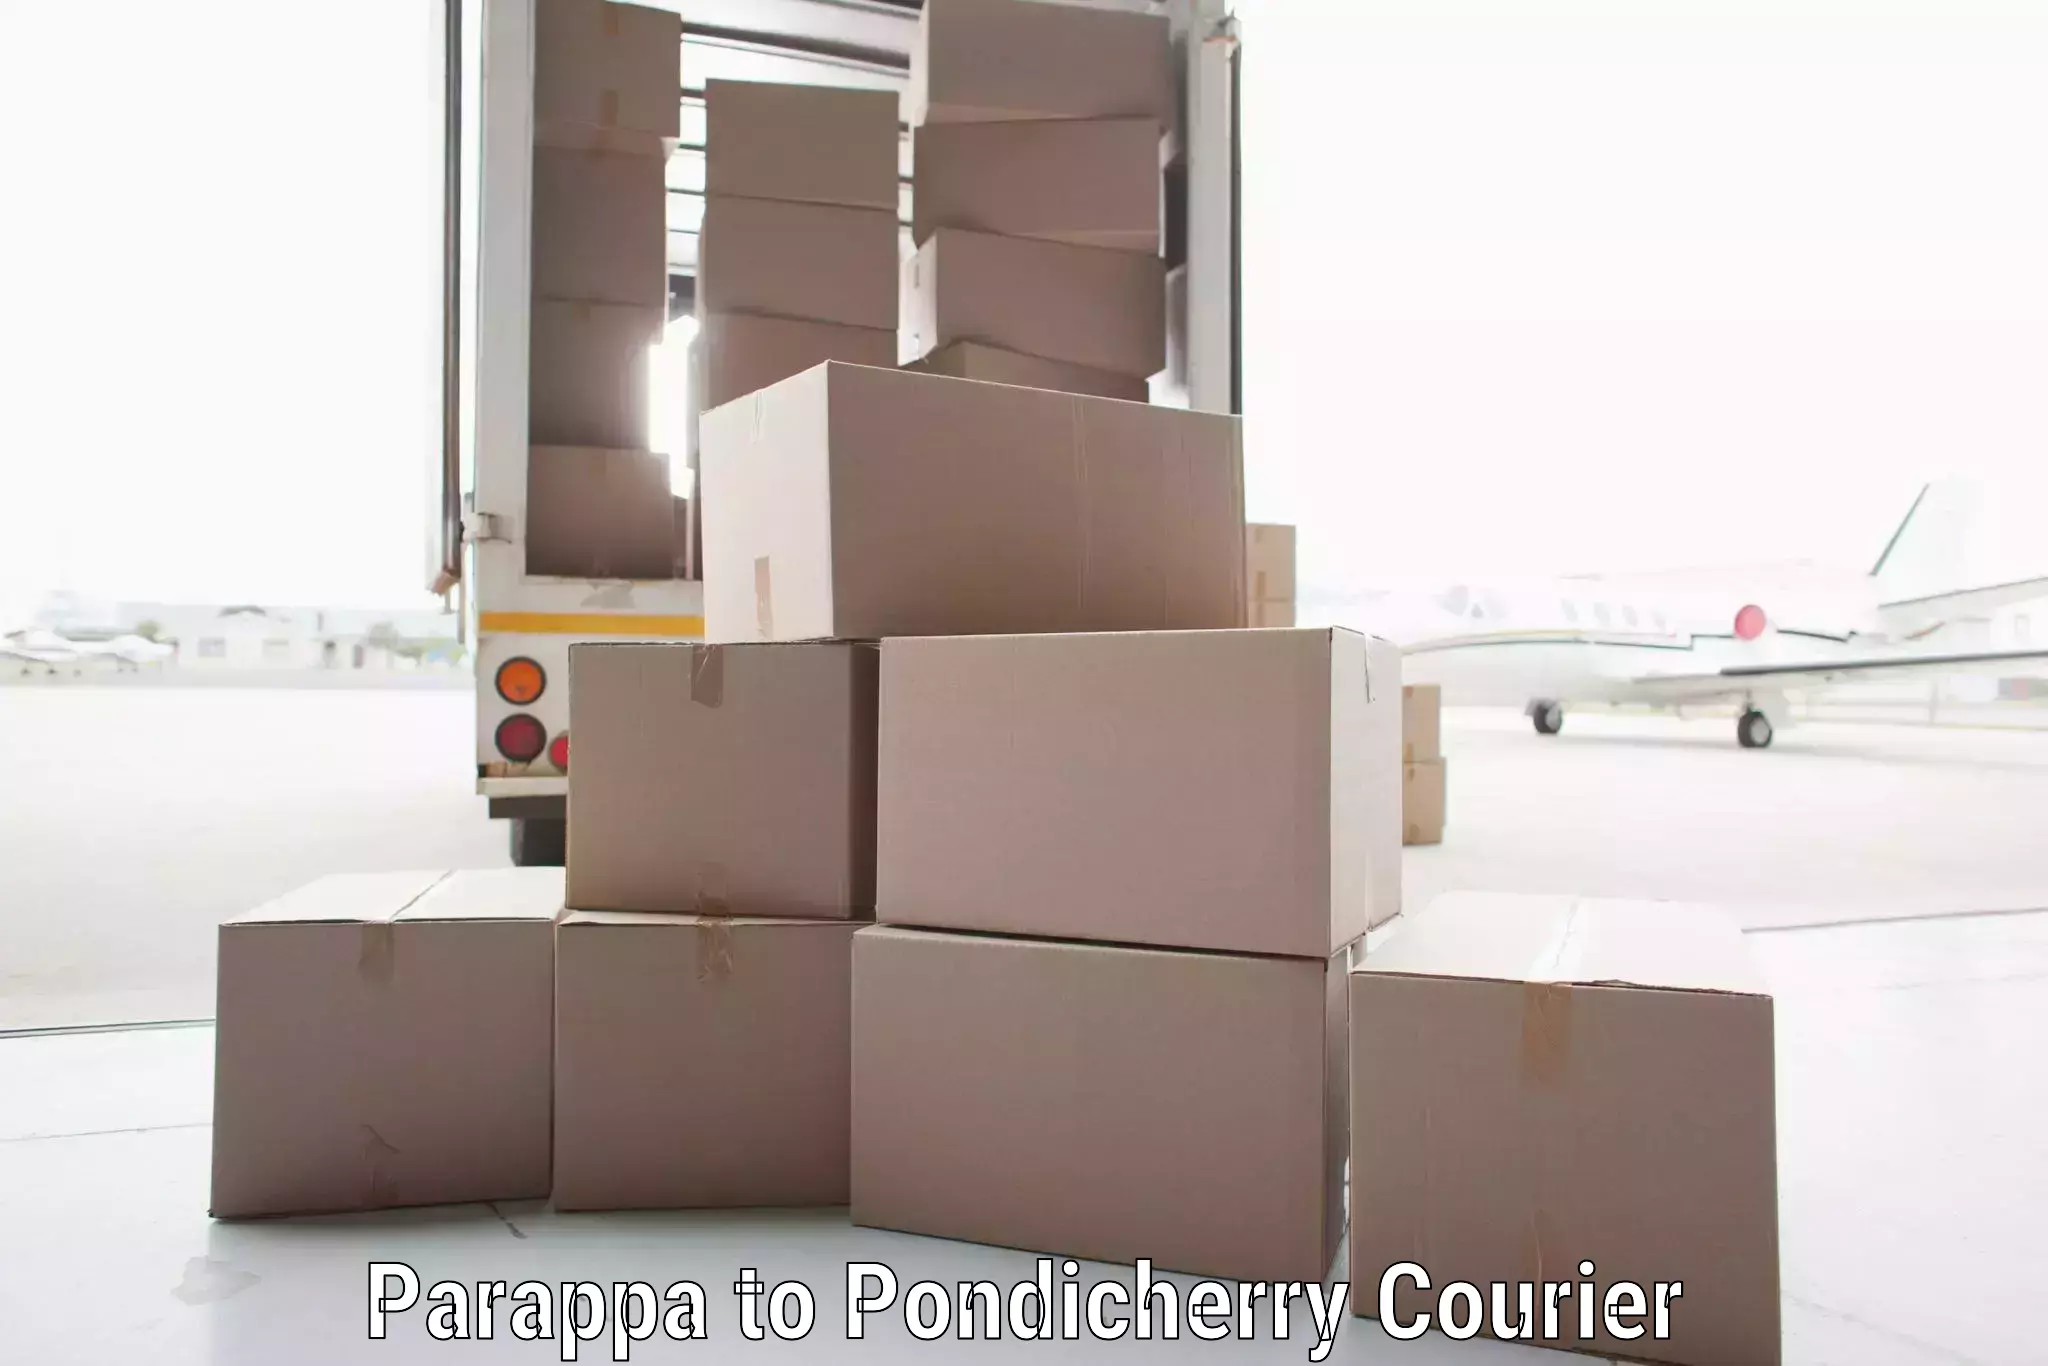 Reliable courier service in Parappa to Metttupalayam